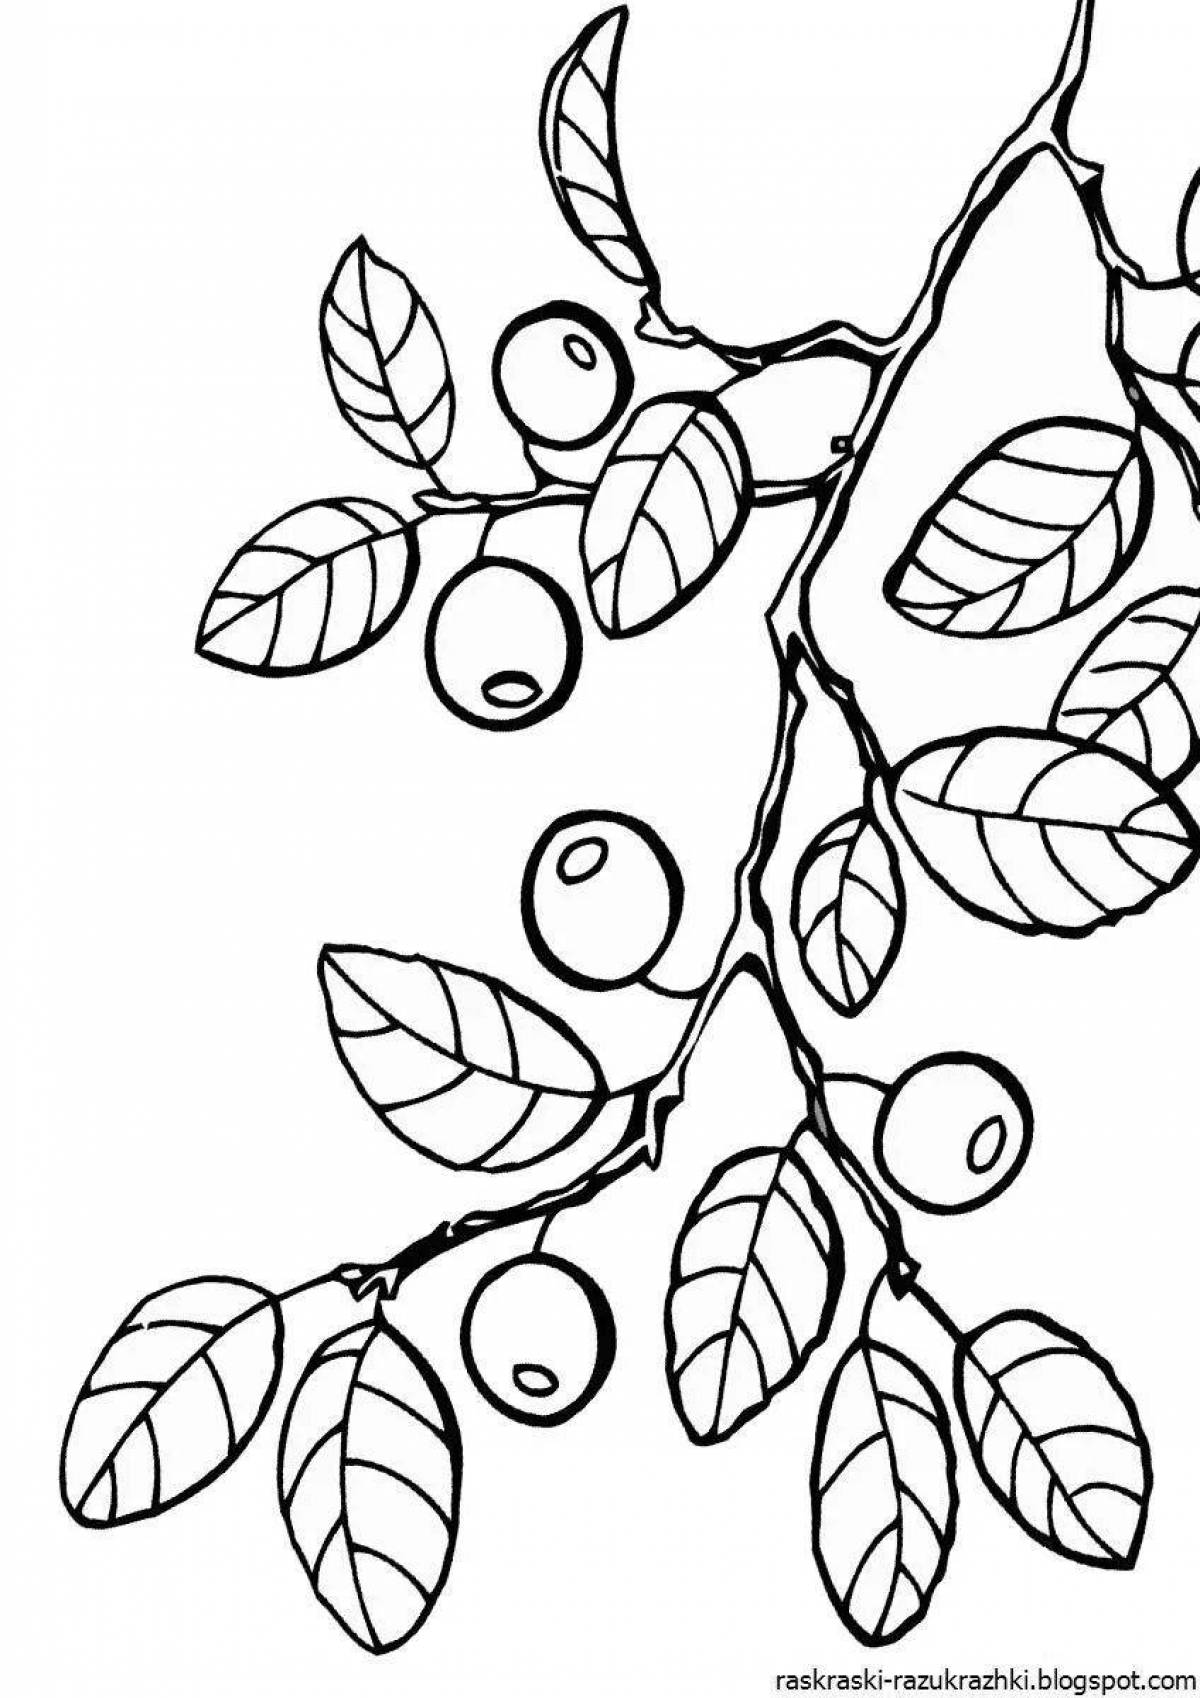 Great branch coloring book for kids